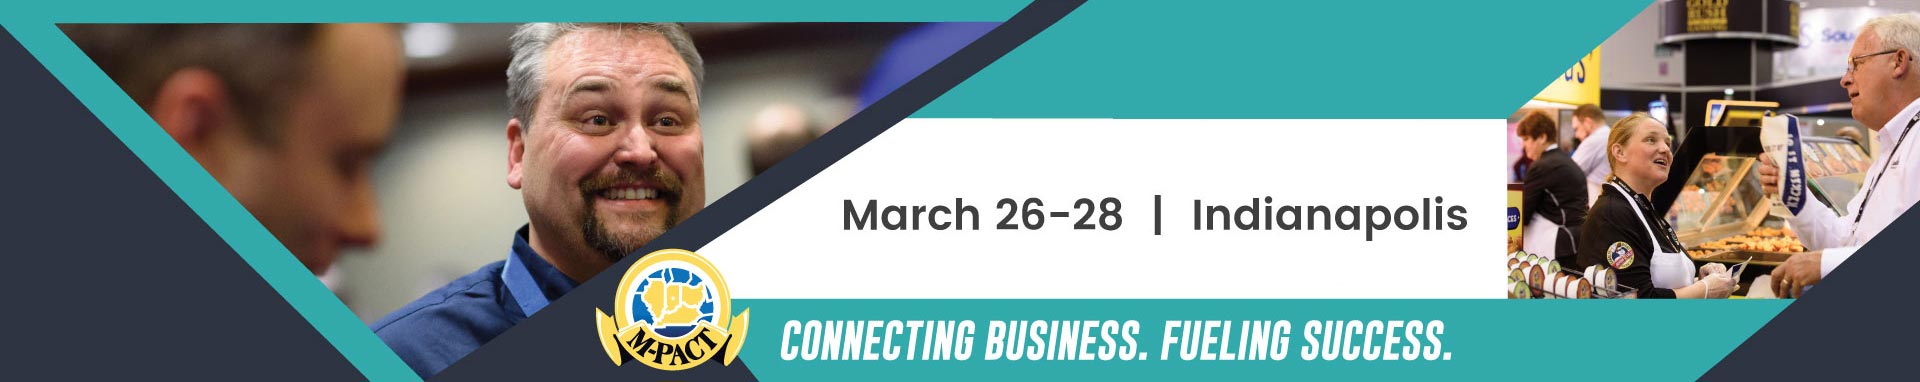 March 26-28 | Indianapolis M-PACT CONNECTING BUSSINESS. FUELING SUCCESS.